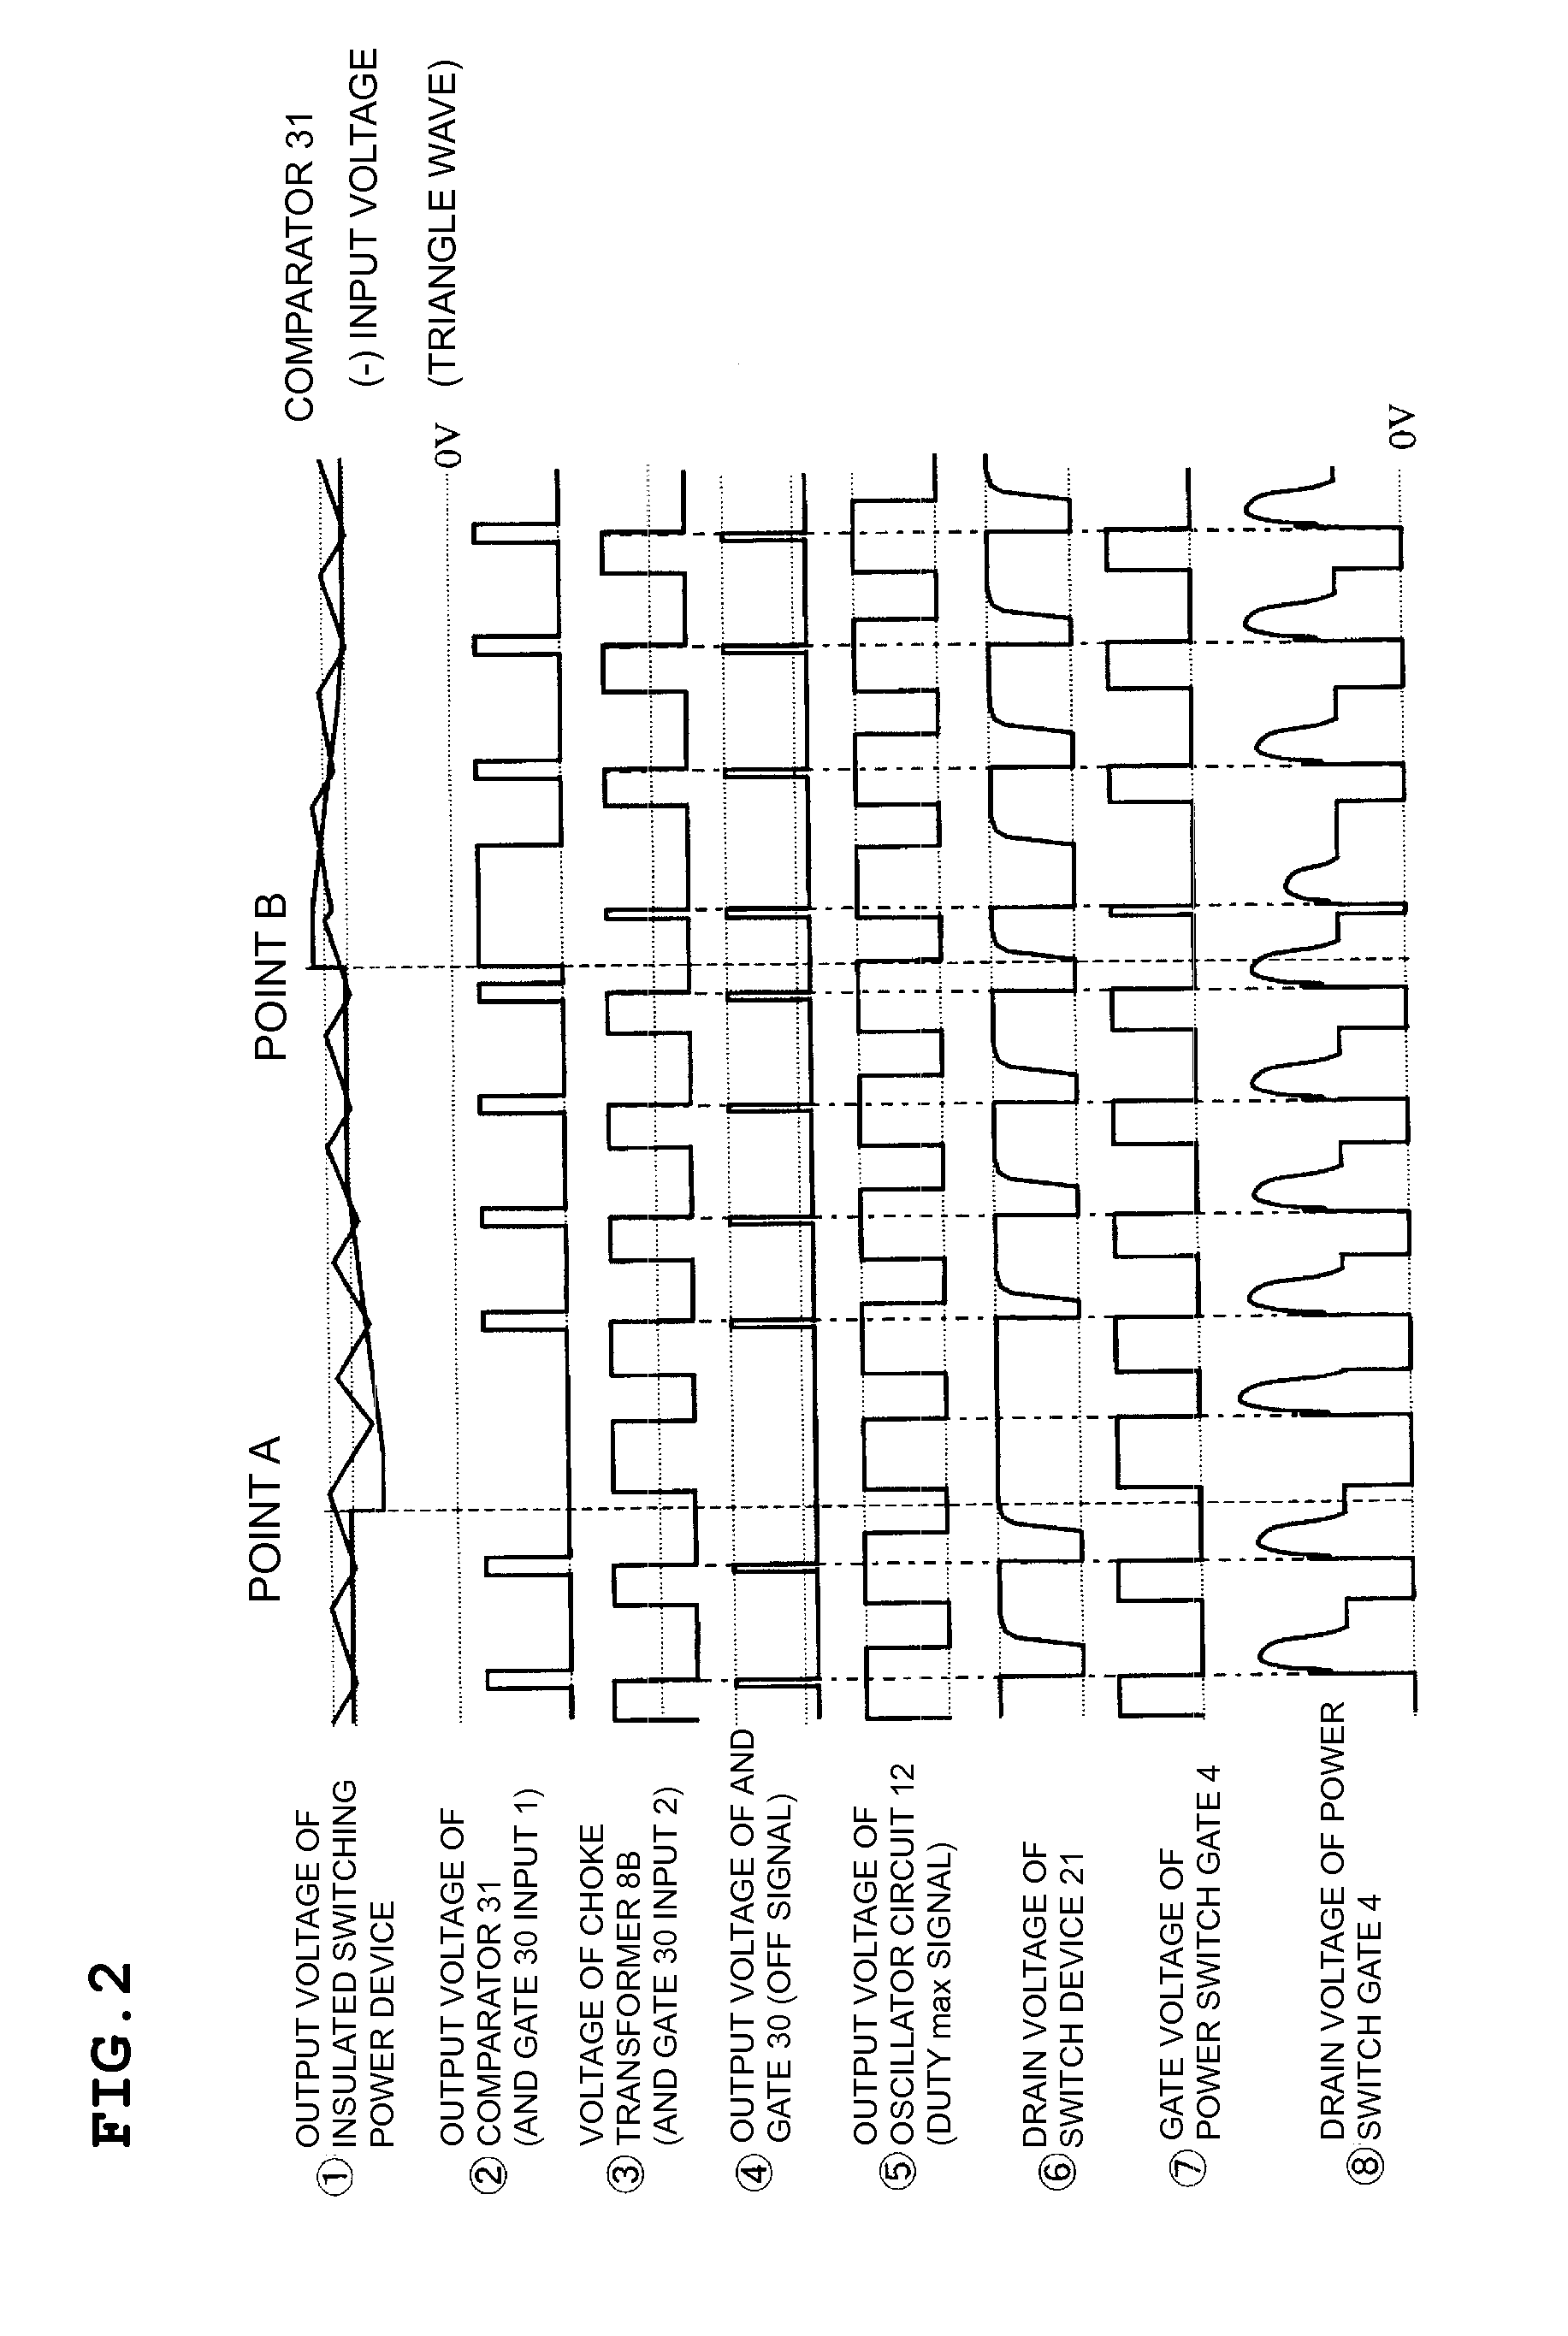 Insulated switching power source device